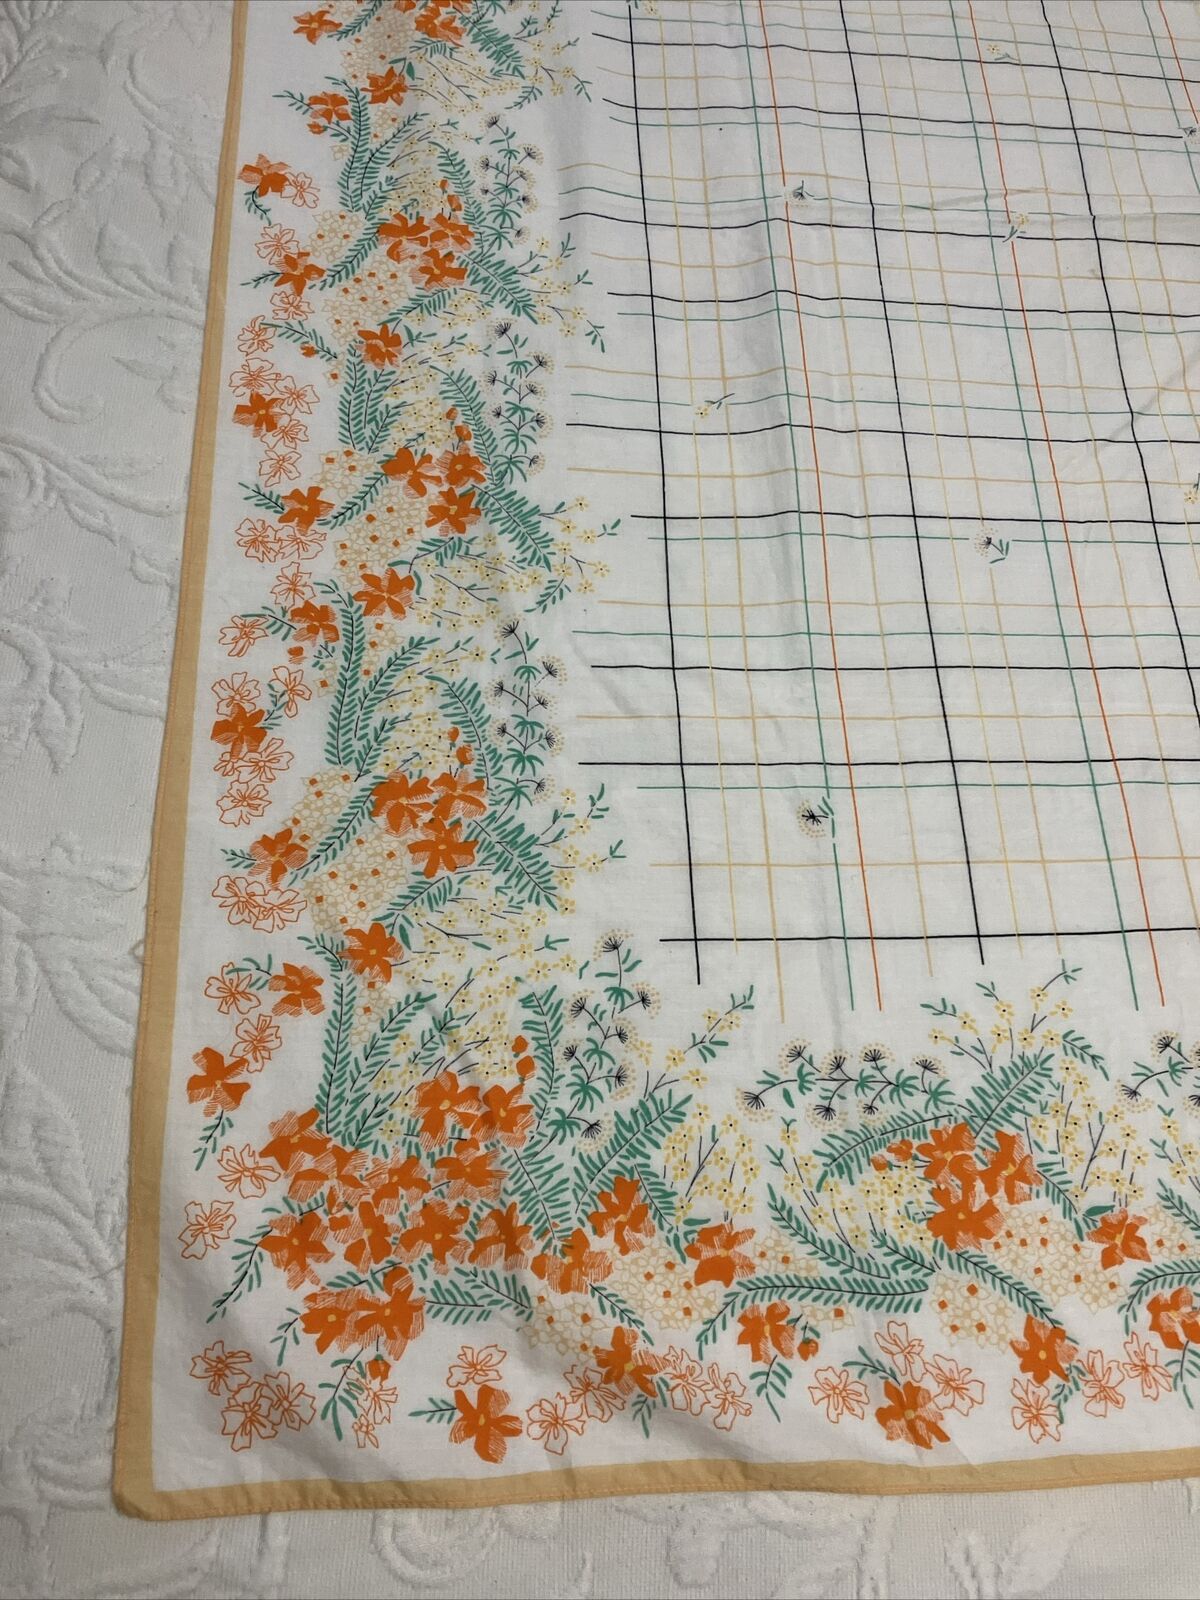 Vintage Orange Floral Printed Luncheon Tablecloth 44” Square Cotton Made Japan